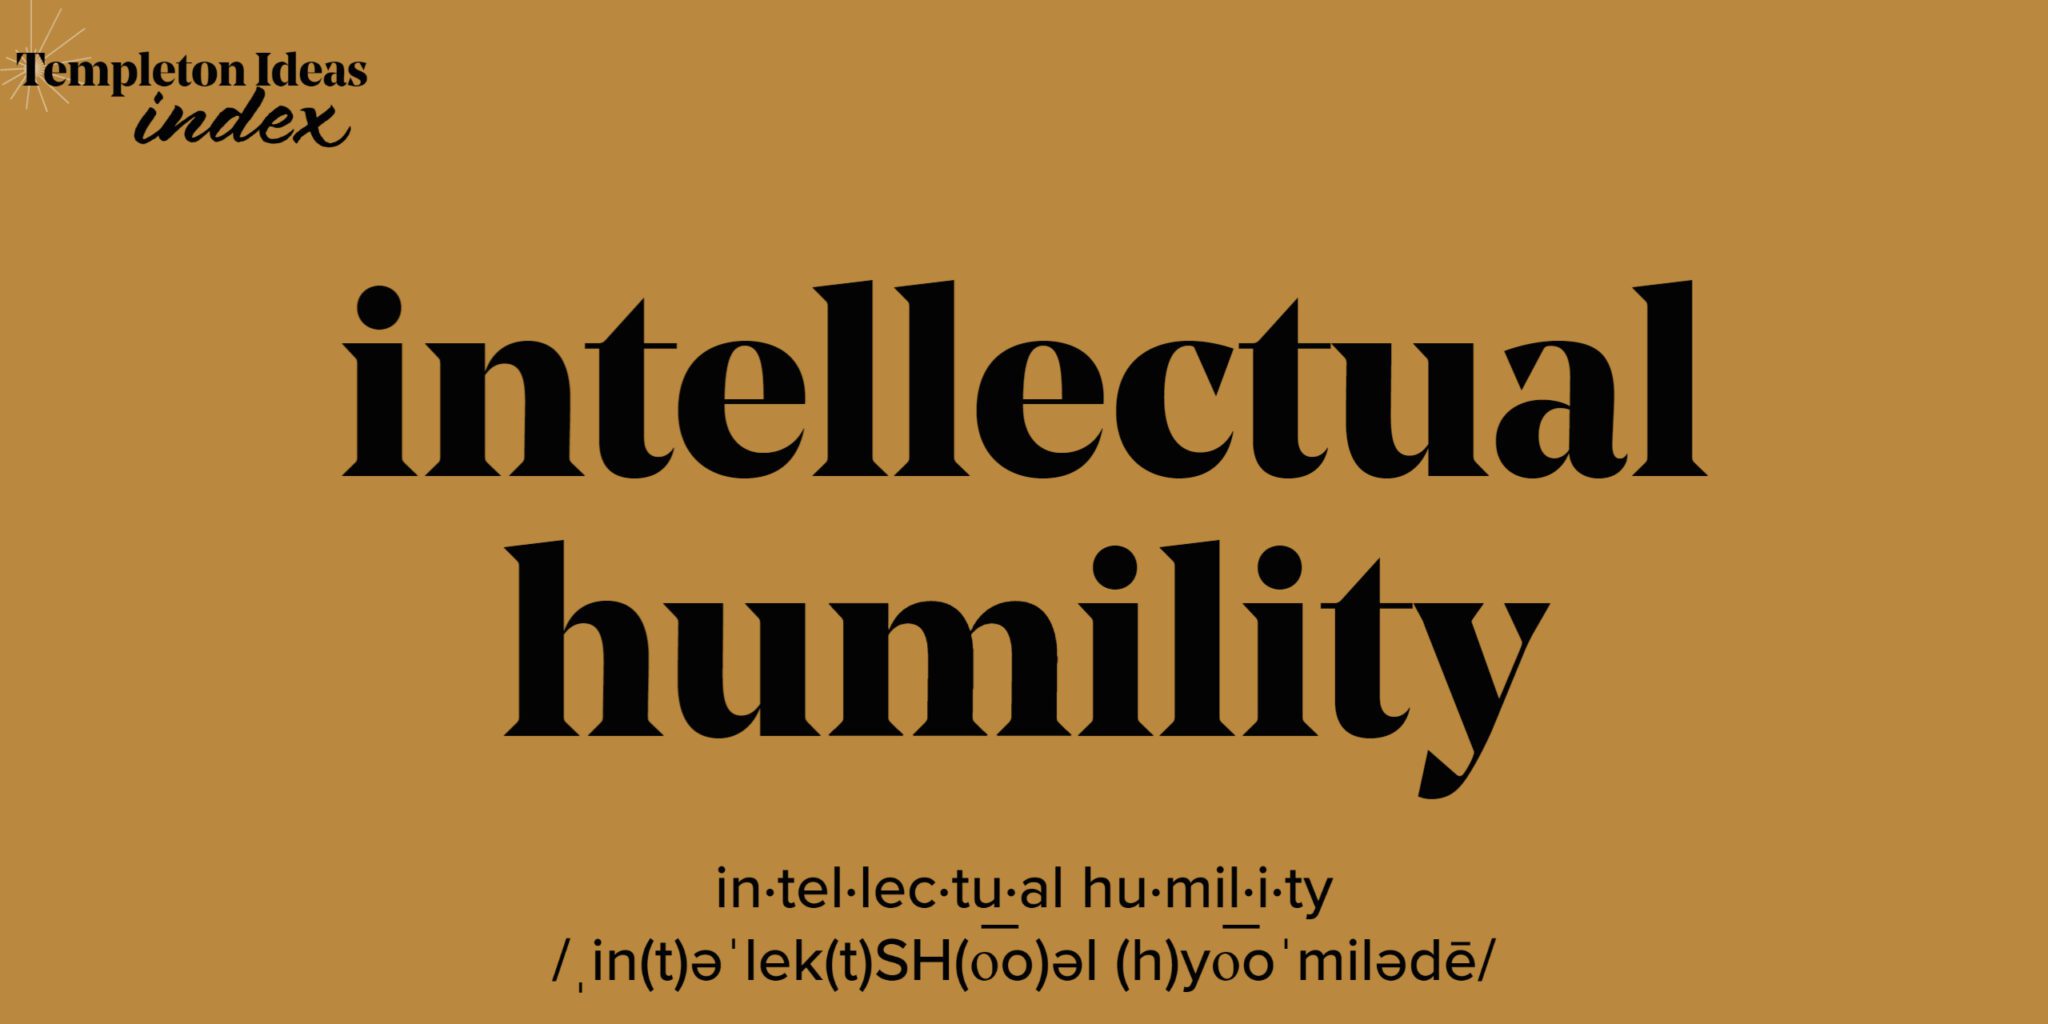 What is Intellectual Humility?